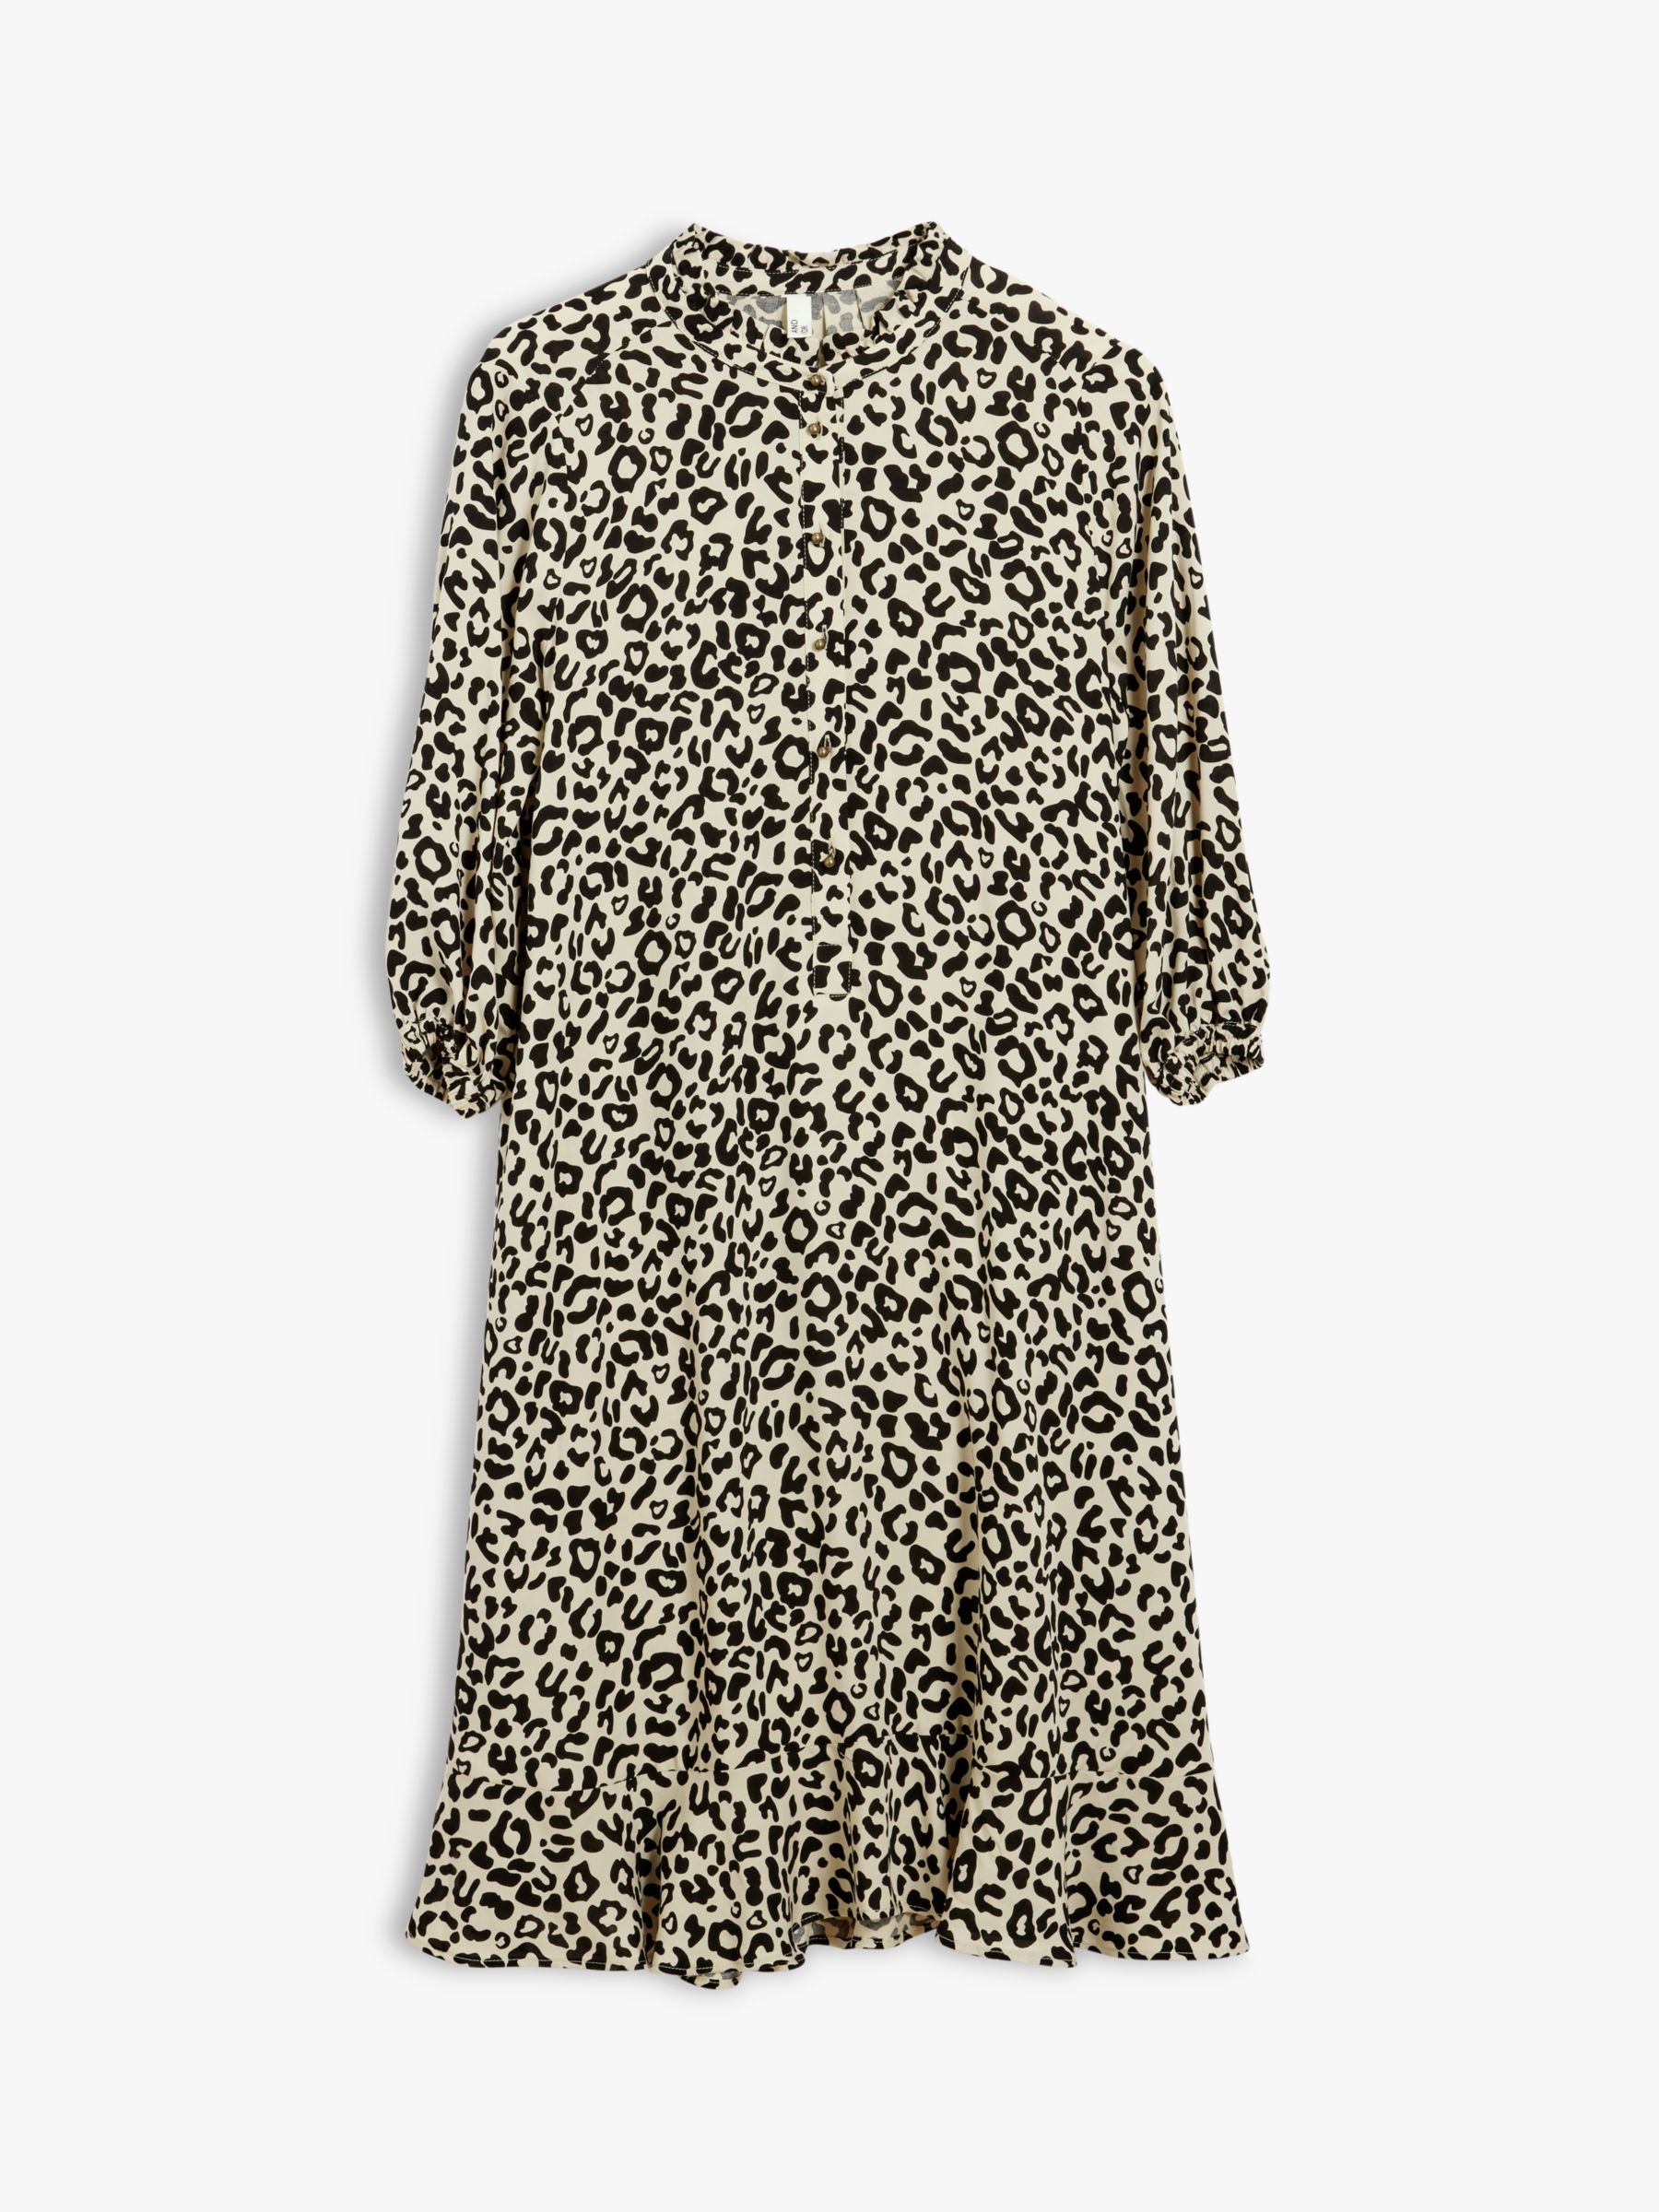 AND/OR Fifi Leopard Dress, Neutral, 6